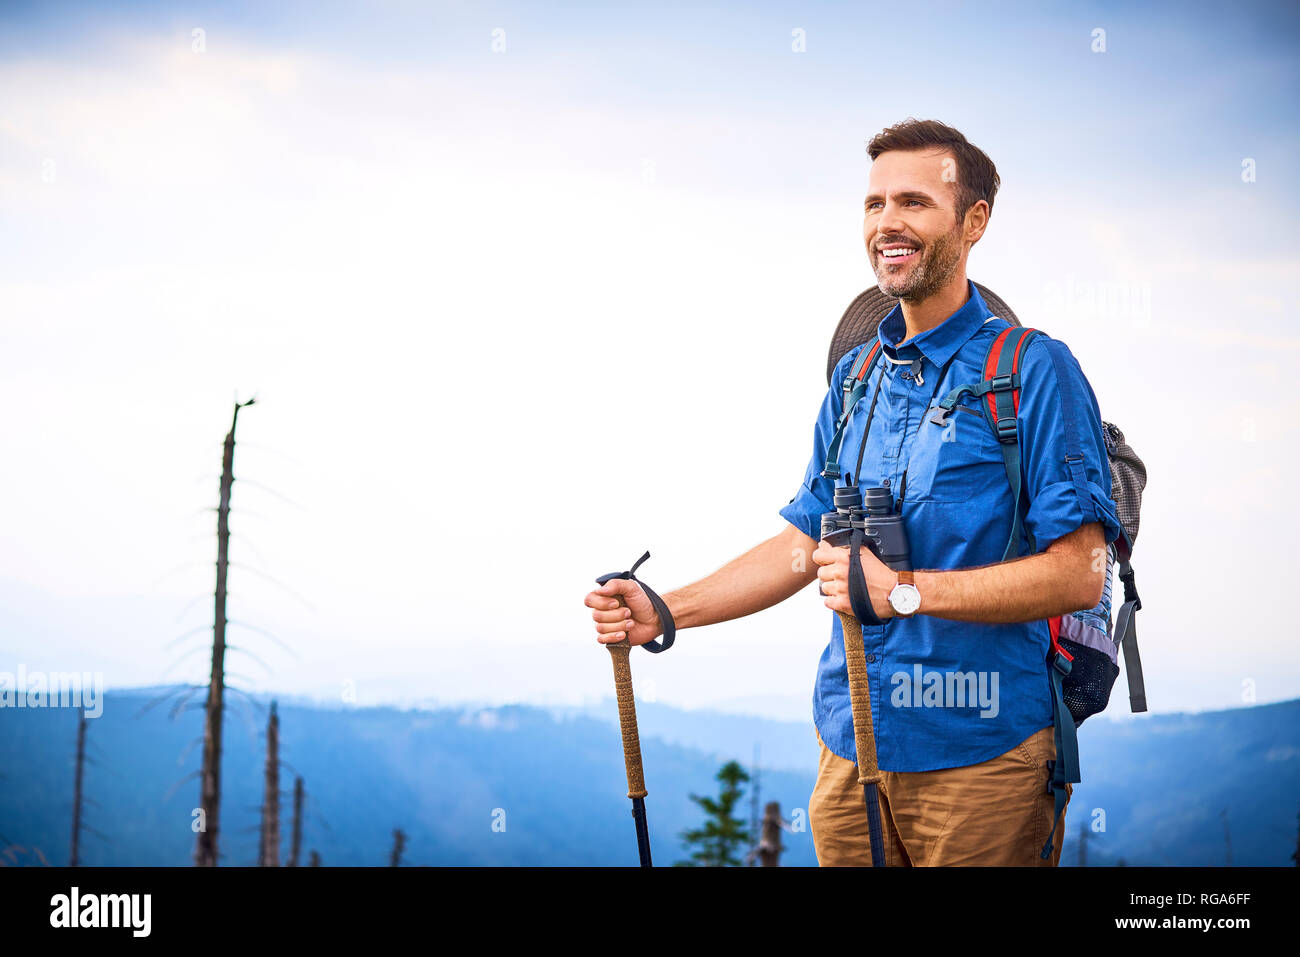 Portrait of smiling man during hiking trip Stock Photo